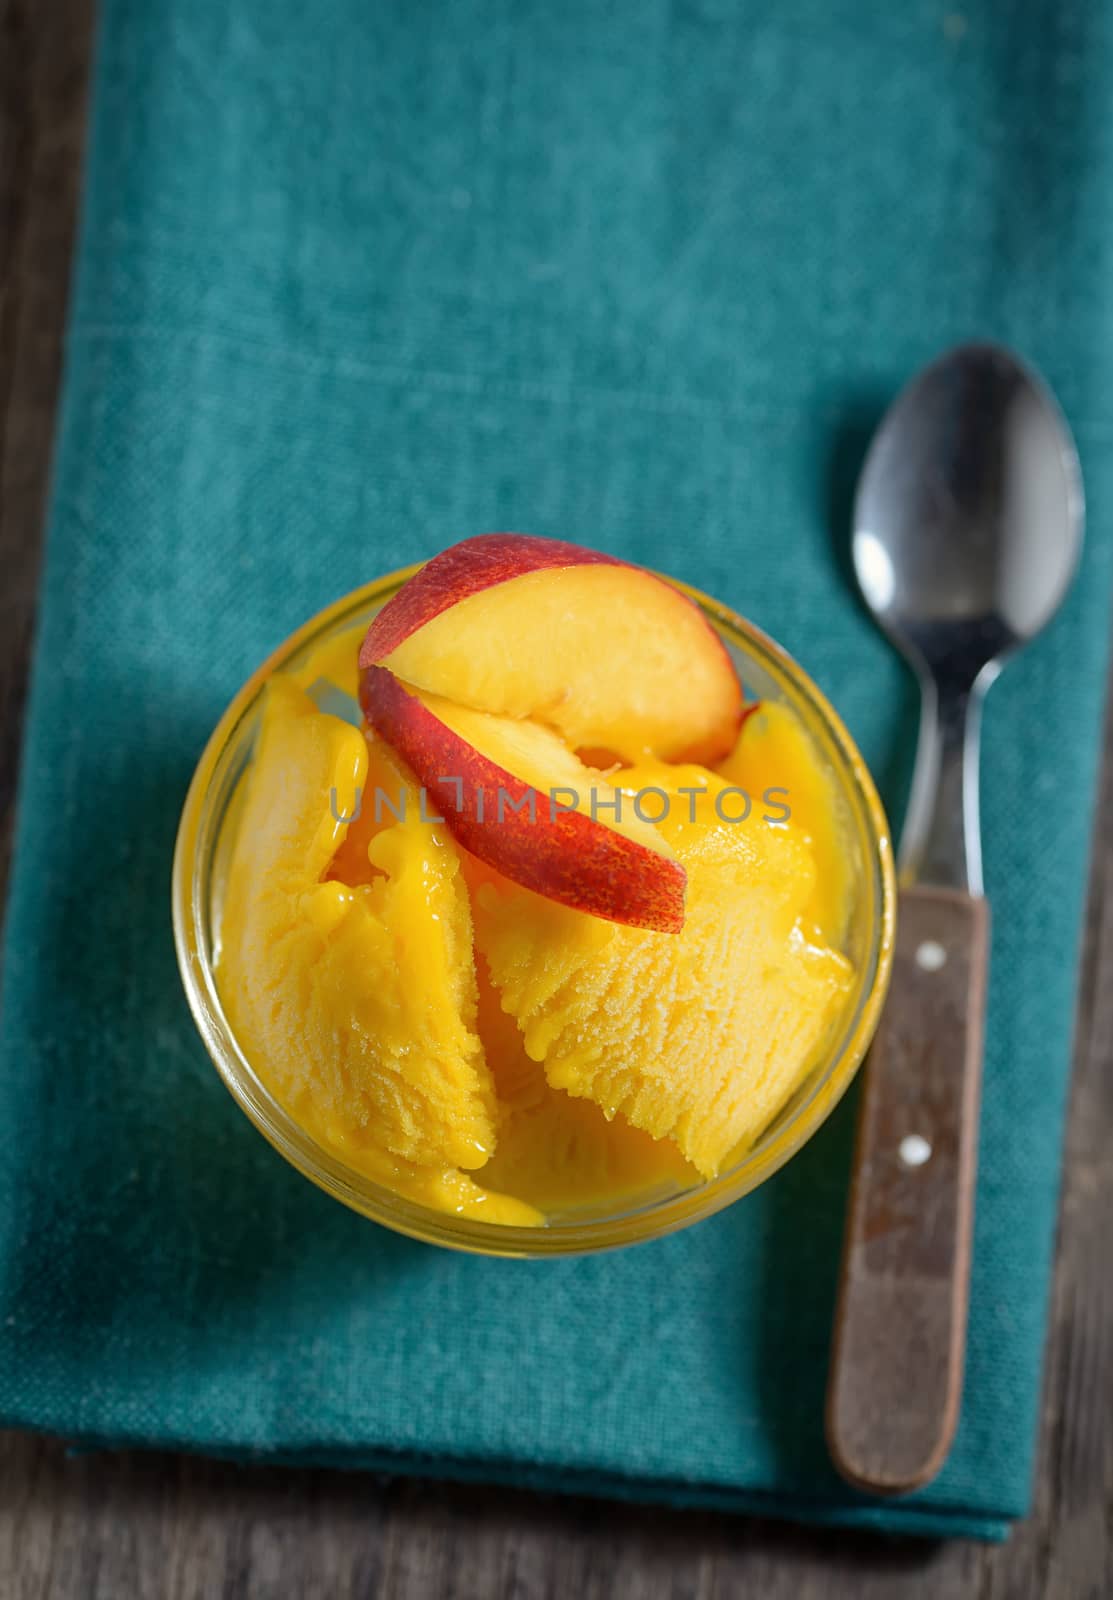 Home made mango ice sorbet with peach slices